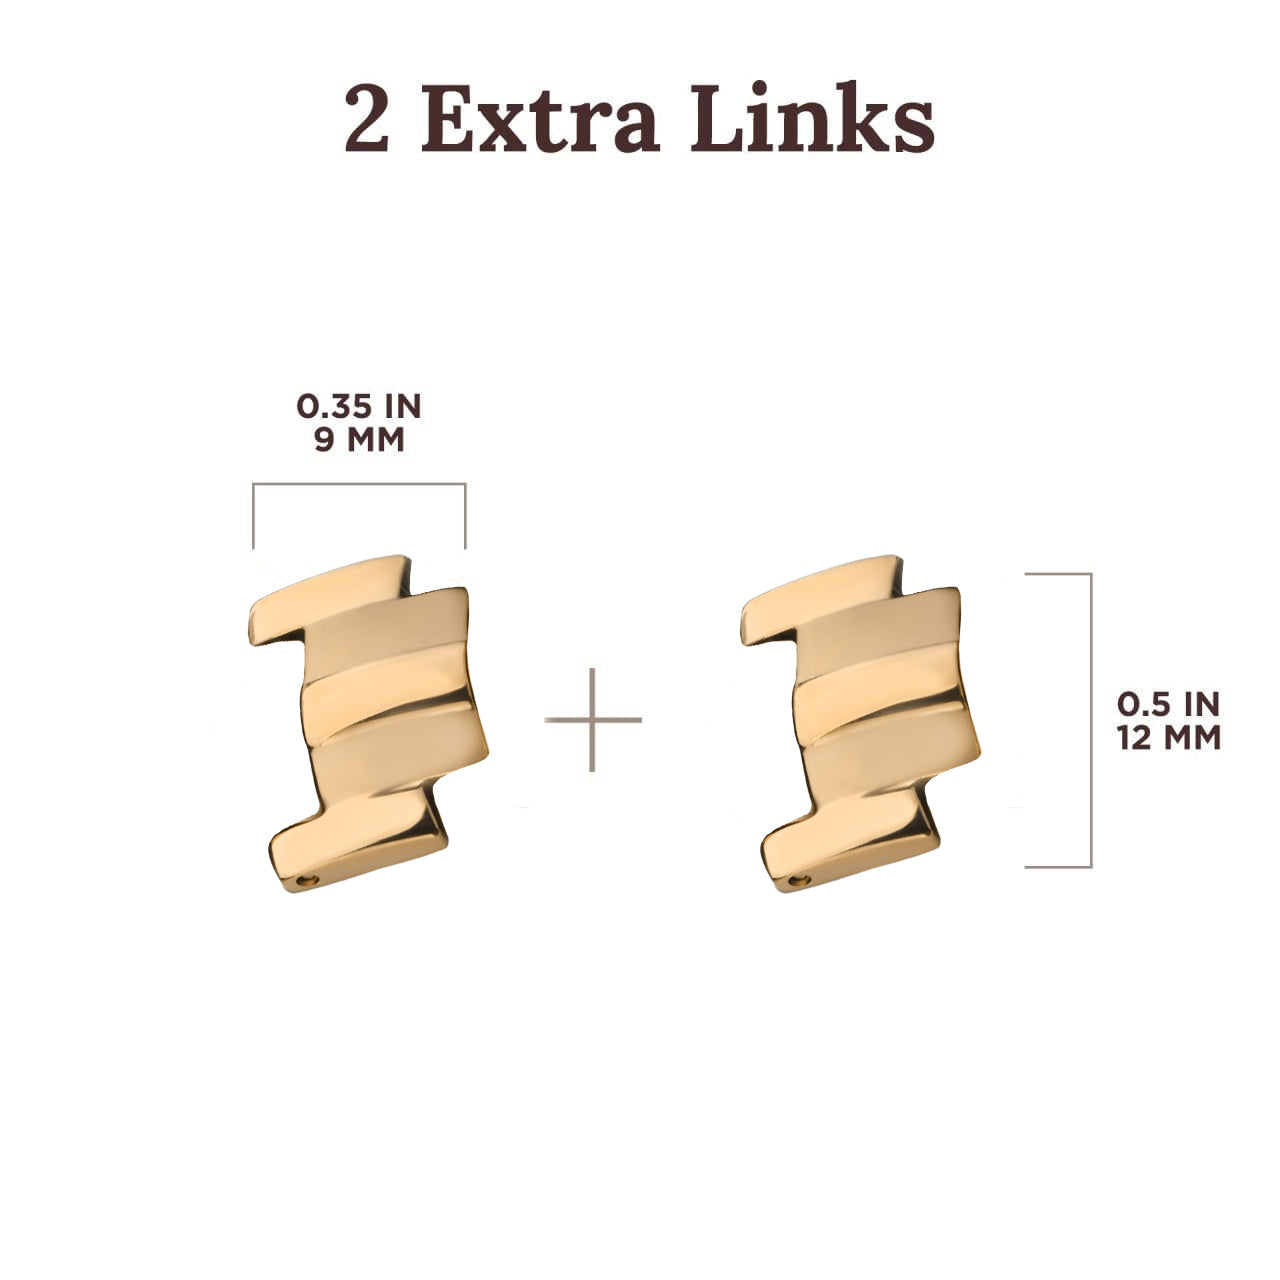 2 Extra Wide Links (087 model)